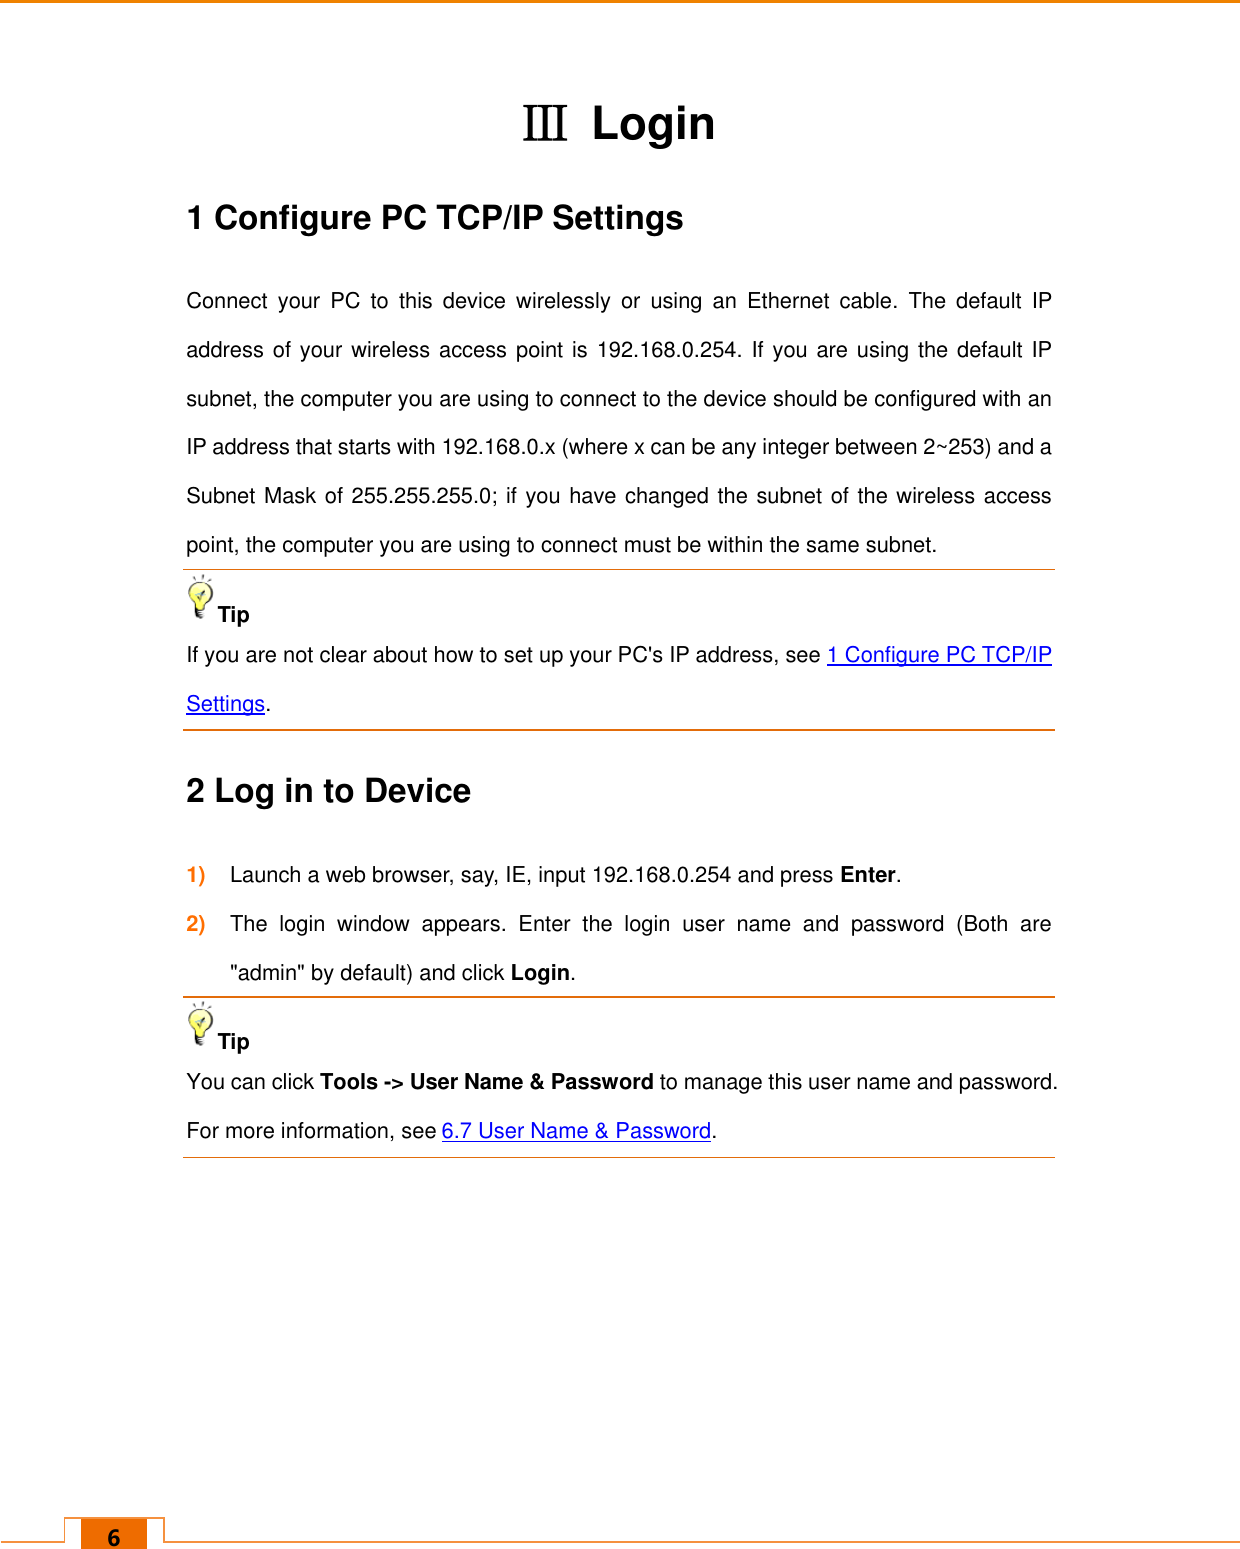   6 Ⅲ  Login 1 Configure PC TCP/IP Settings Connect  your  PC  to  this  device  wirelessly  or  using  an  Ethernet  cable.  The  default  IP address of your wireless access point is 192.168.0.254. If you are using the default IP subnet, the computer you are using to connect to the device should be configured with an IP address that starts with 192.168.0.x (where x can be any integer between 2~253) and a Subnet Mask of 255.255.255.0; if you have changed the subnet of the wireless access point, the computer you are using to connect must be within the same subnet. Tip  If you are not clear about how to set up your PC&apos;s IP address, see 1 Configure PC TCP/IP Settings. 2 Log in to Device 1) Launch a web browser, say, IE, input 192.168.0.254 and press Enter. 2) The  login  window  appears.  Enter  the  login  user  name  and  password  (Both  are &quot;admin&quot; by default) and click Login. Tip  You can click Tools -&gt; User Name &amp; Password to manage this user name and password. For more information, see 6.7 User Name &amp; Password.    